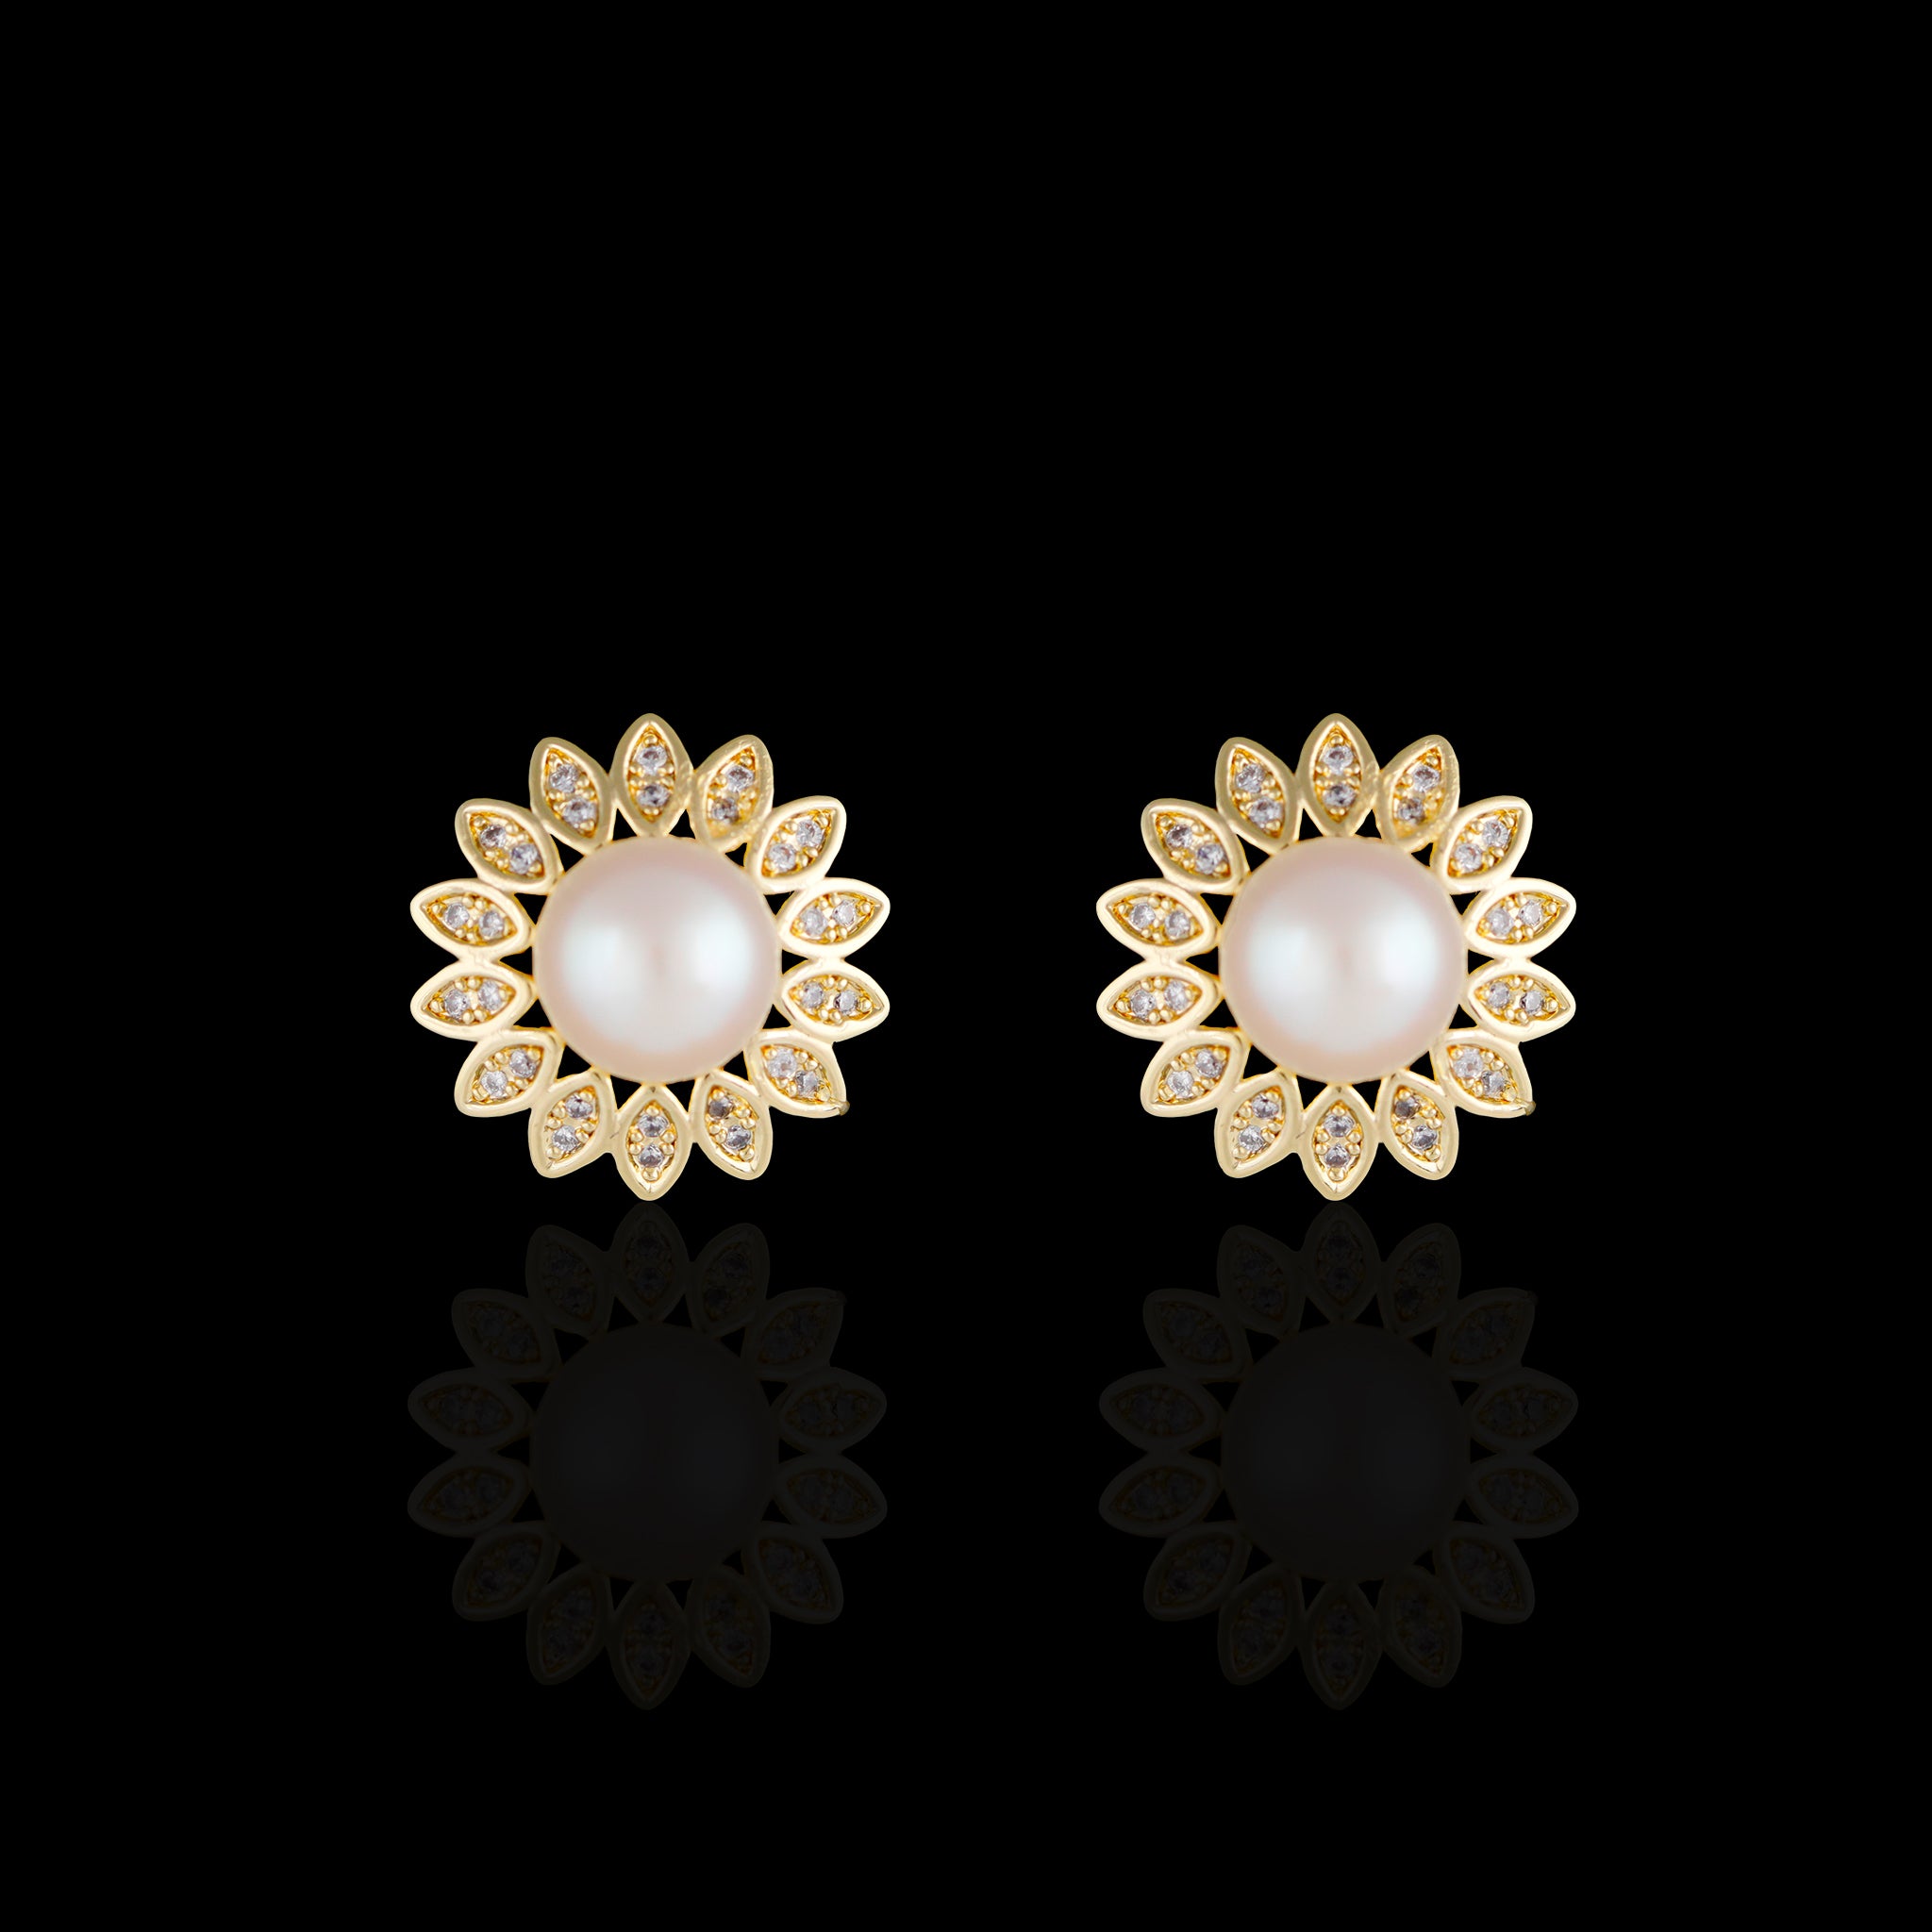 Freshwater Pearl Daisy Stud Earrings in 14K Gold with Gemstones - L'Amour Pearls